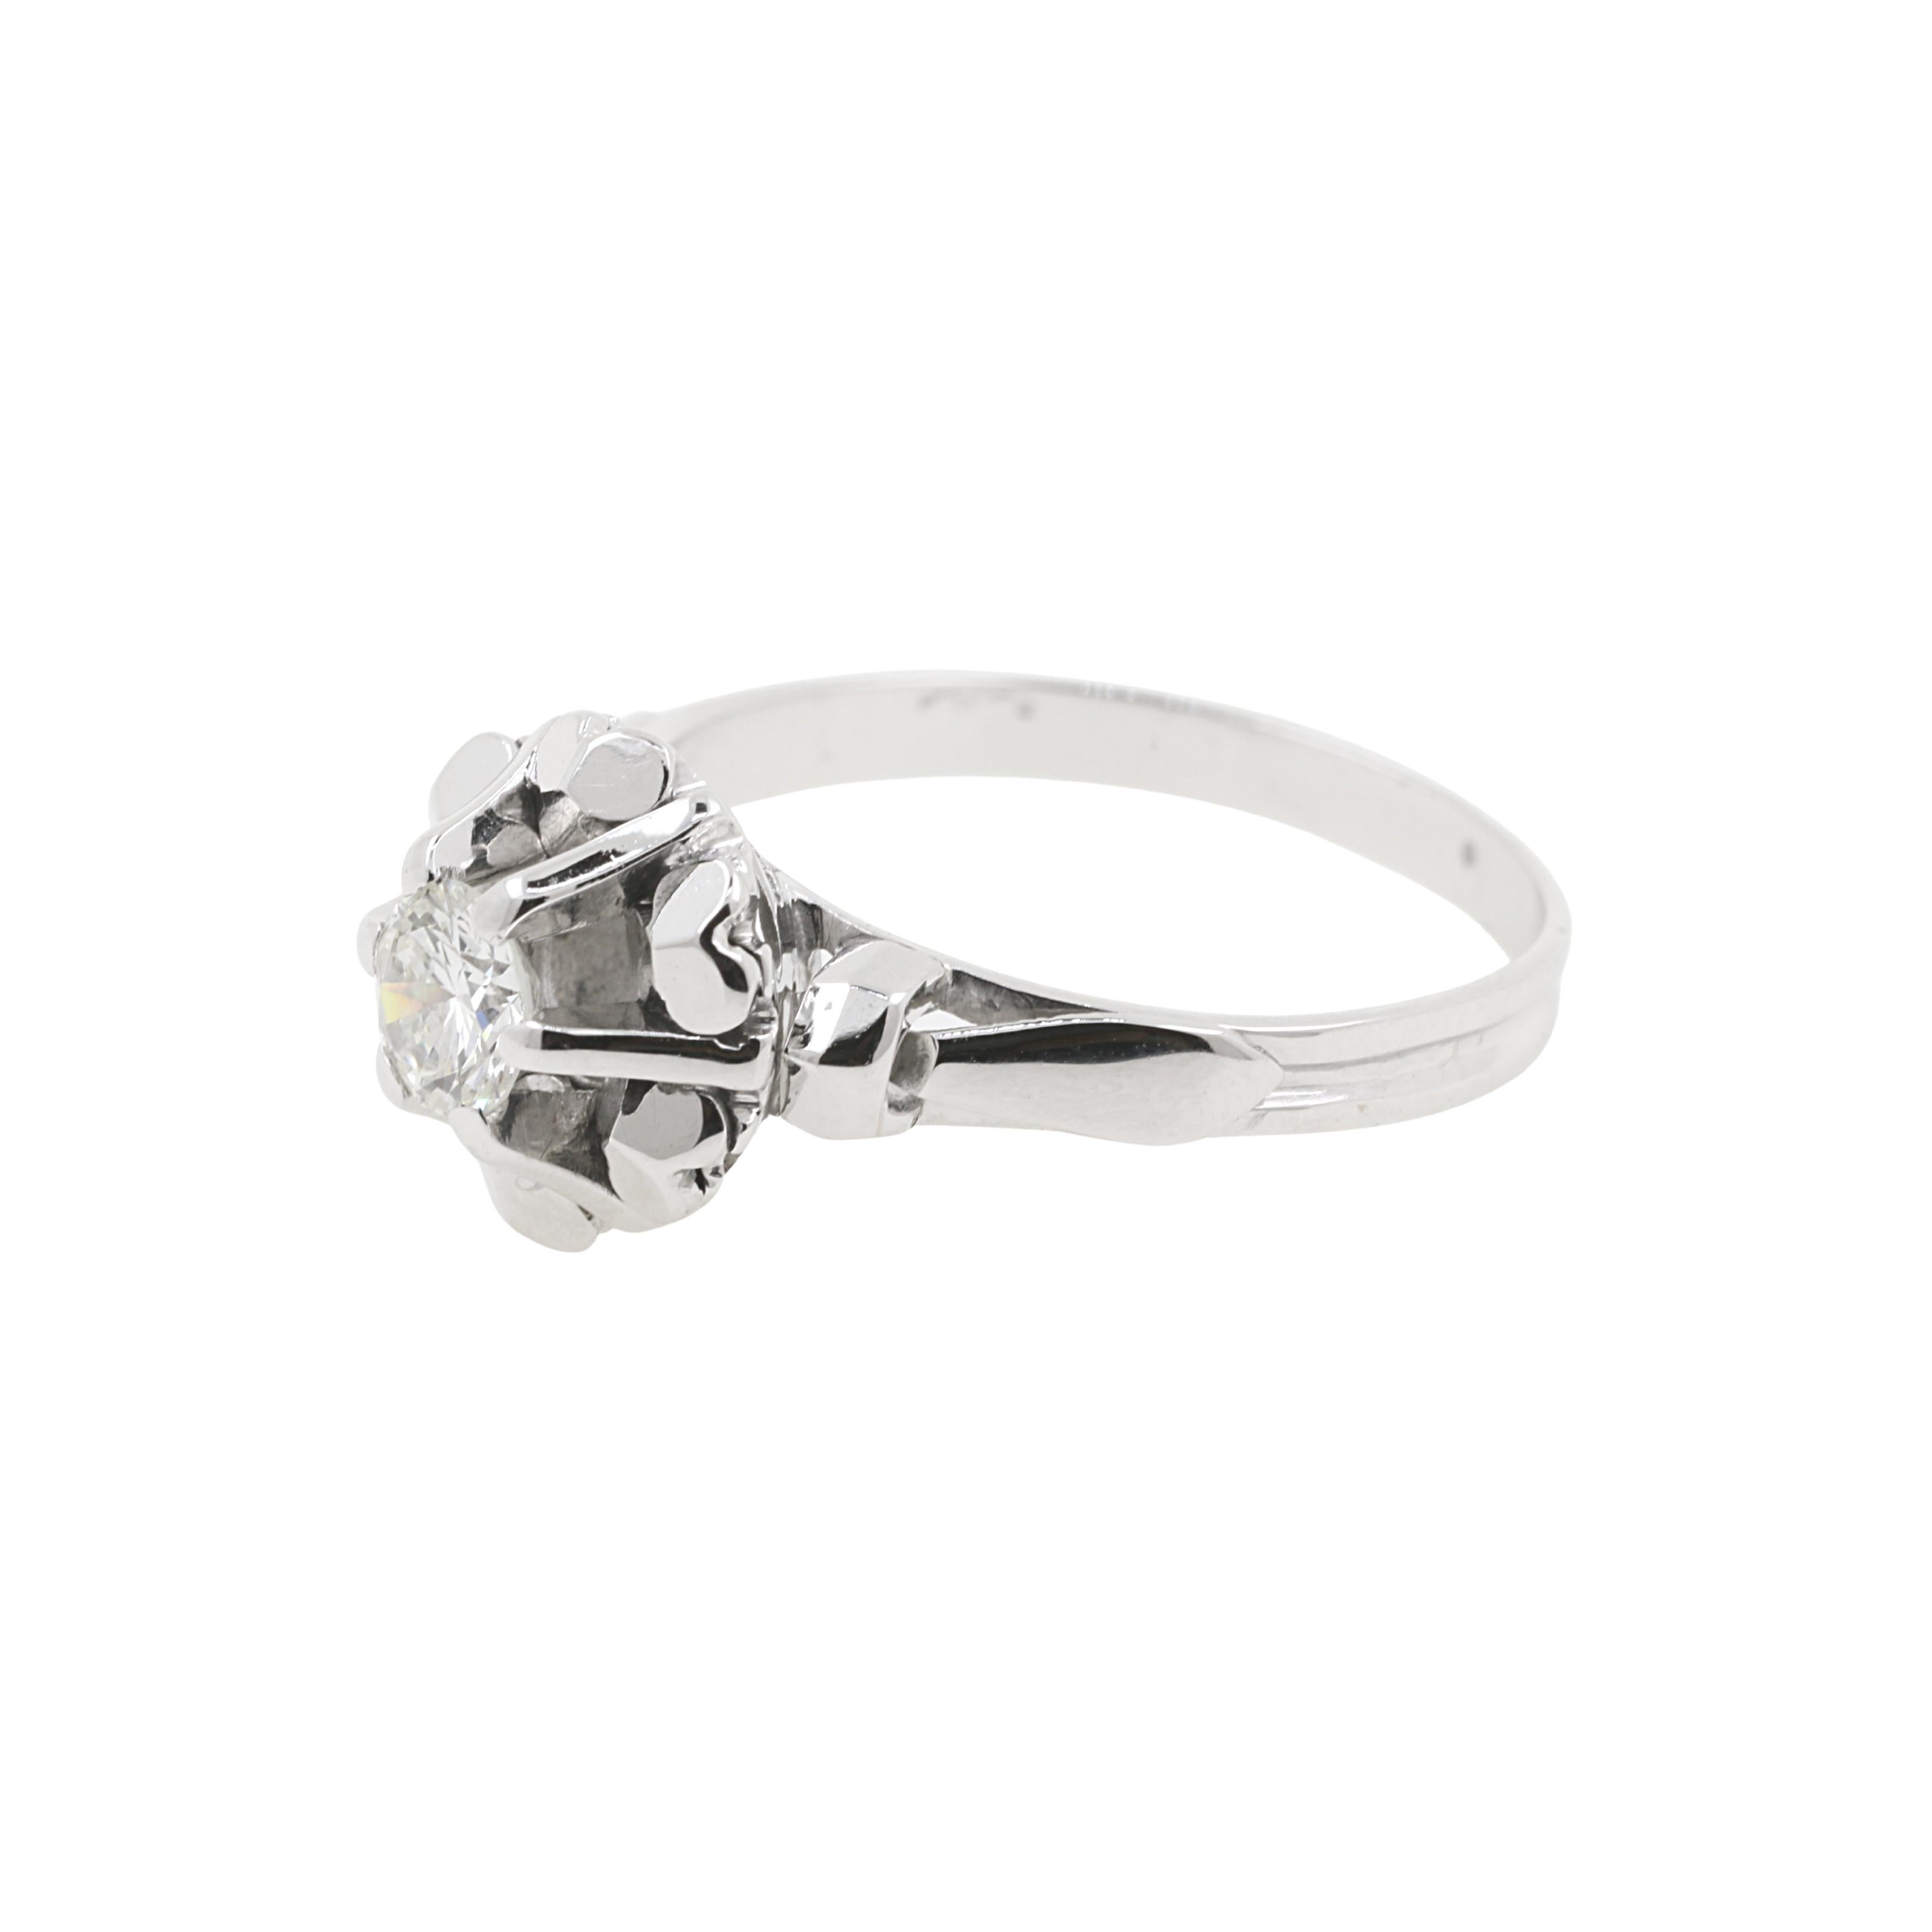 0.20 Carat Diamond Engagement Ring on 18 Karat White Gold In Excellent Condition For Sale In Crema, Cremona